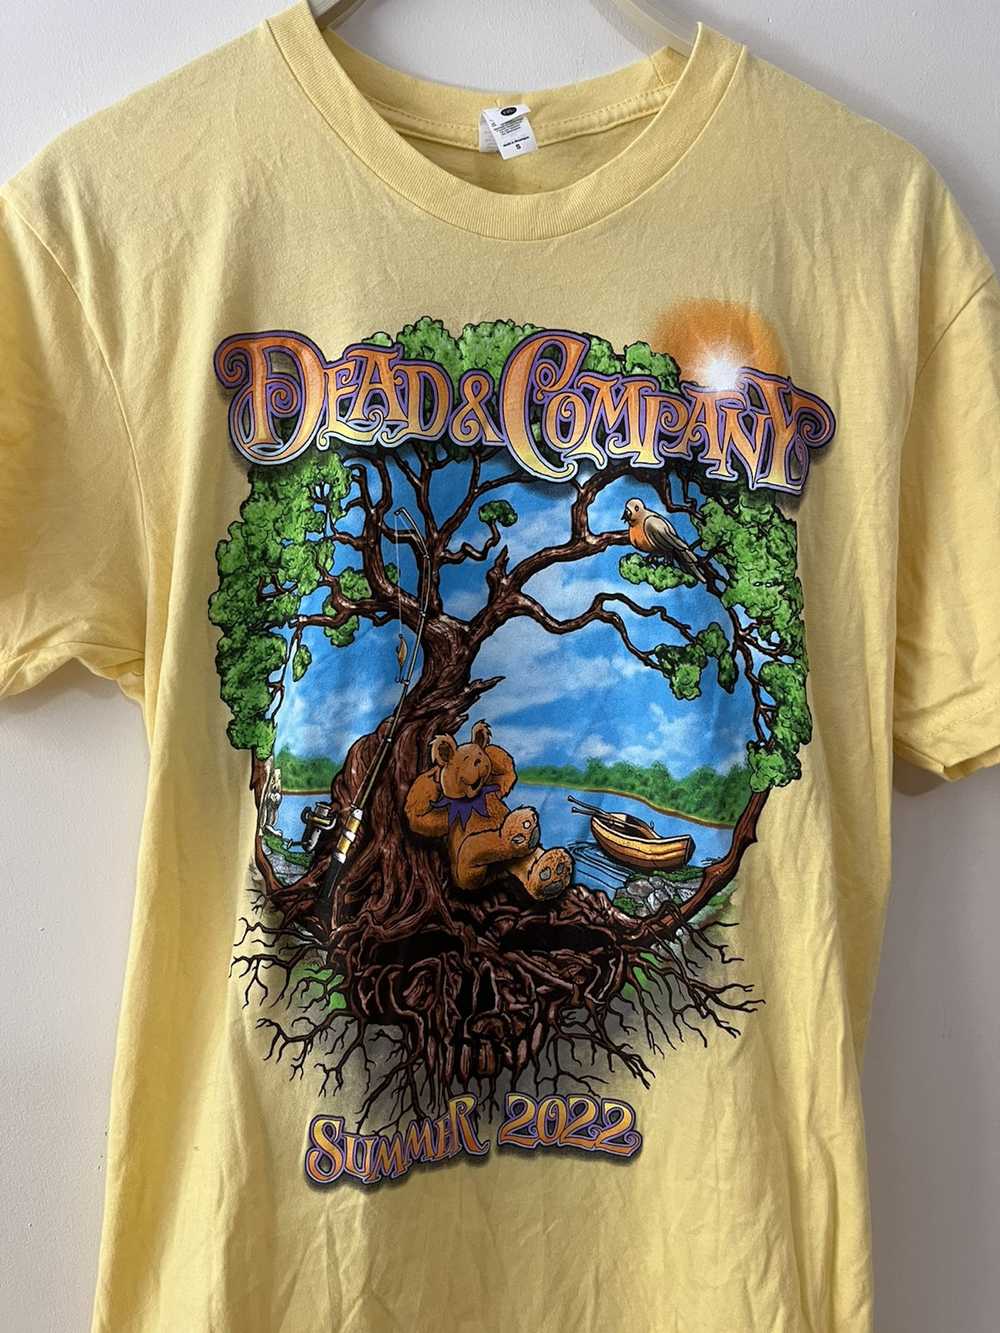 Grateful Dead Dead and Company 2022 Tour Tee Shirt - image 3